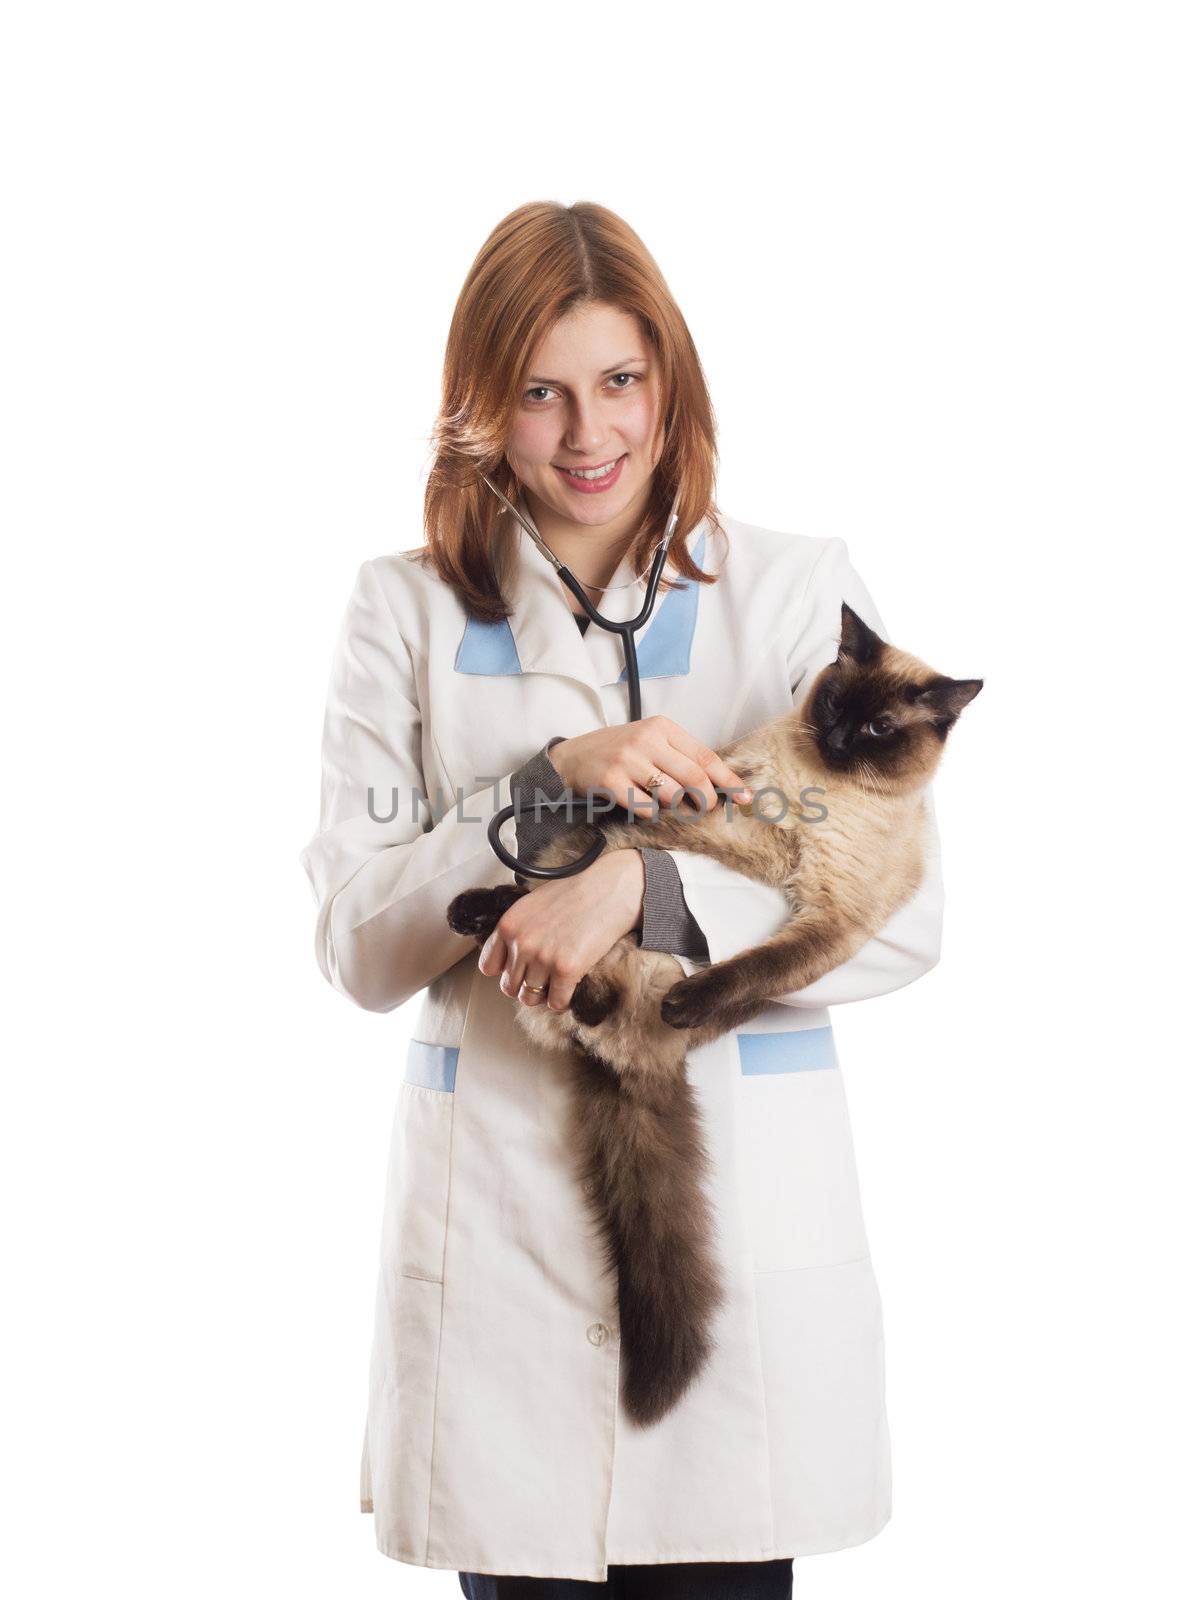 veterinarian inspects a Siamese cat on a white background isolated